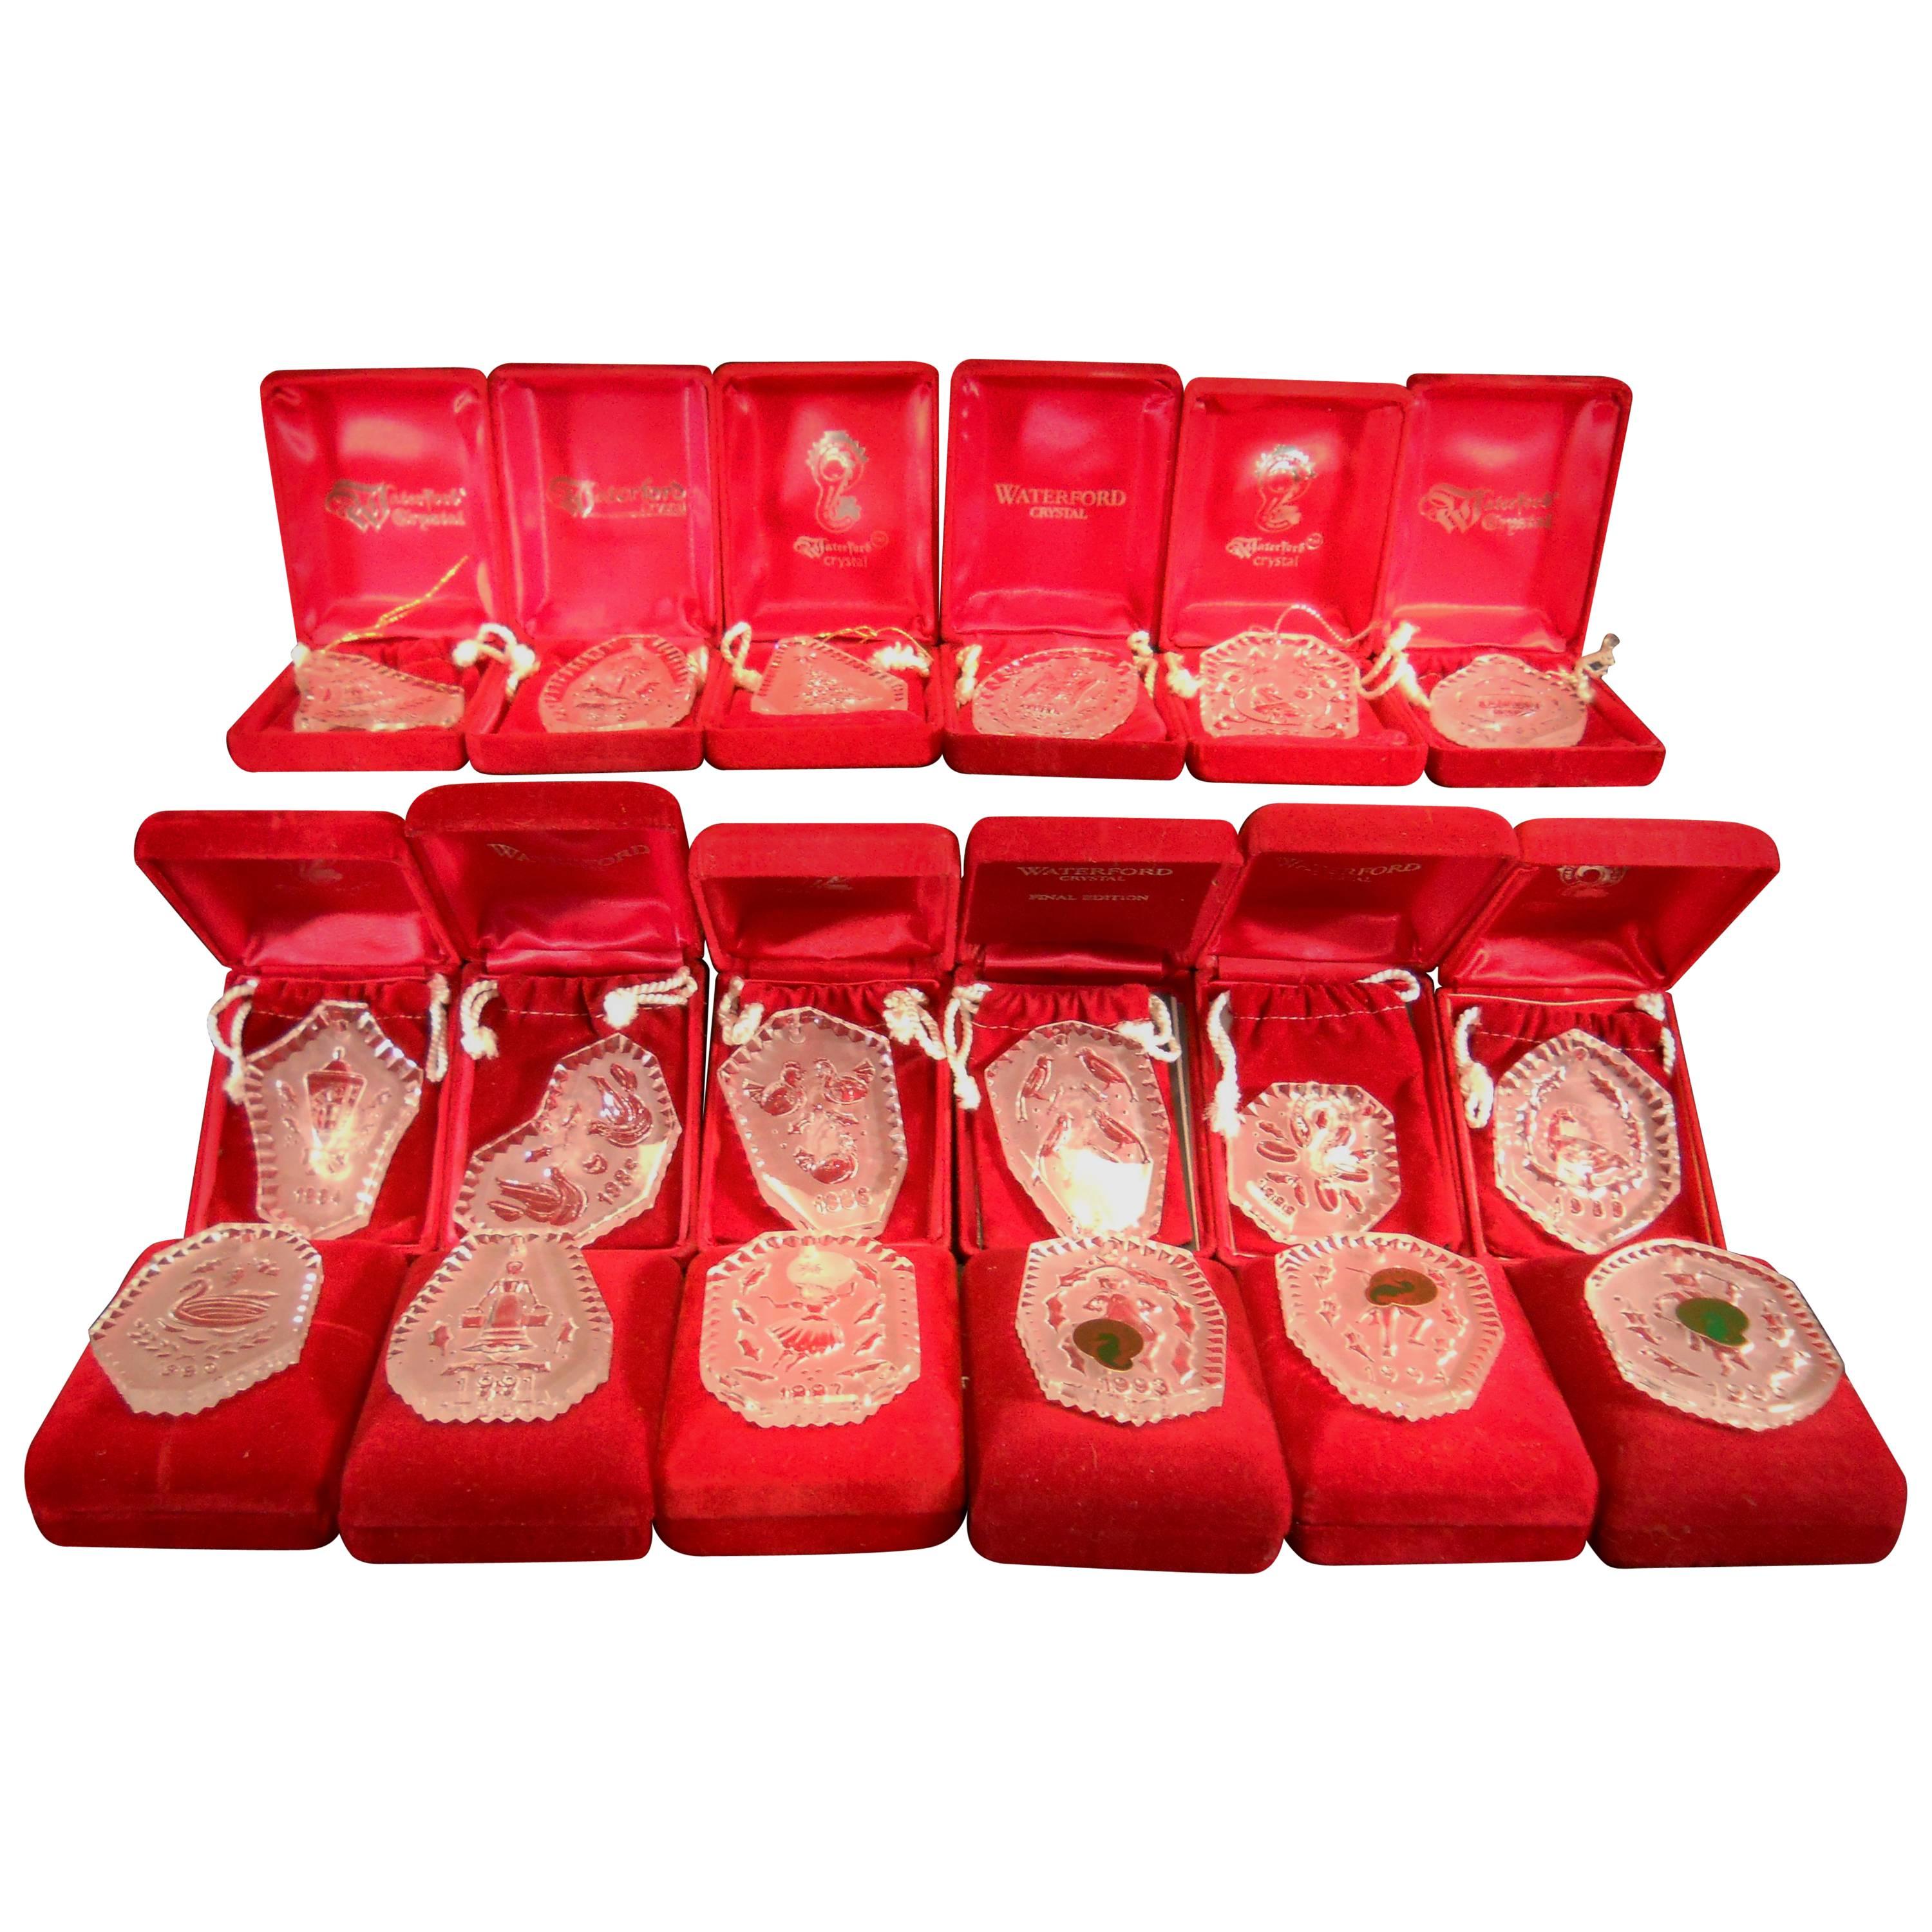 Complete Set of 18 Waterford Days of Christmas Flat Ornaments with Boxes For Sale